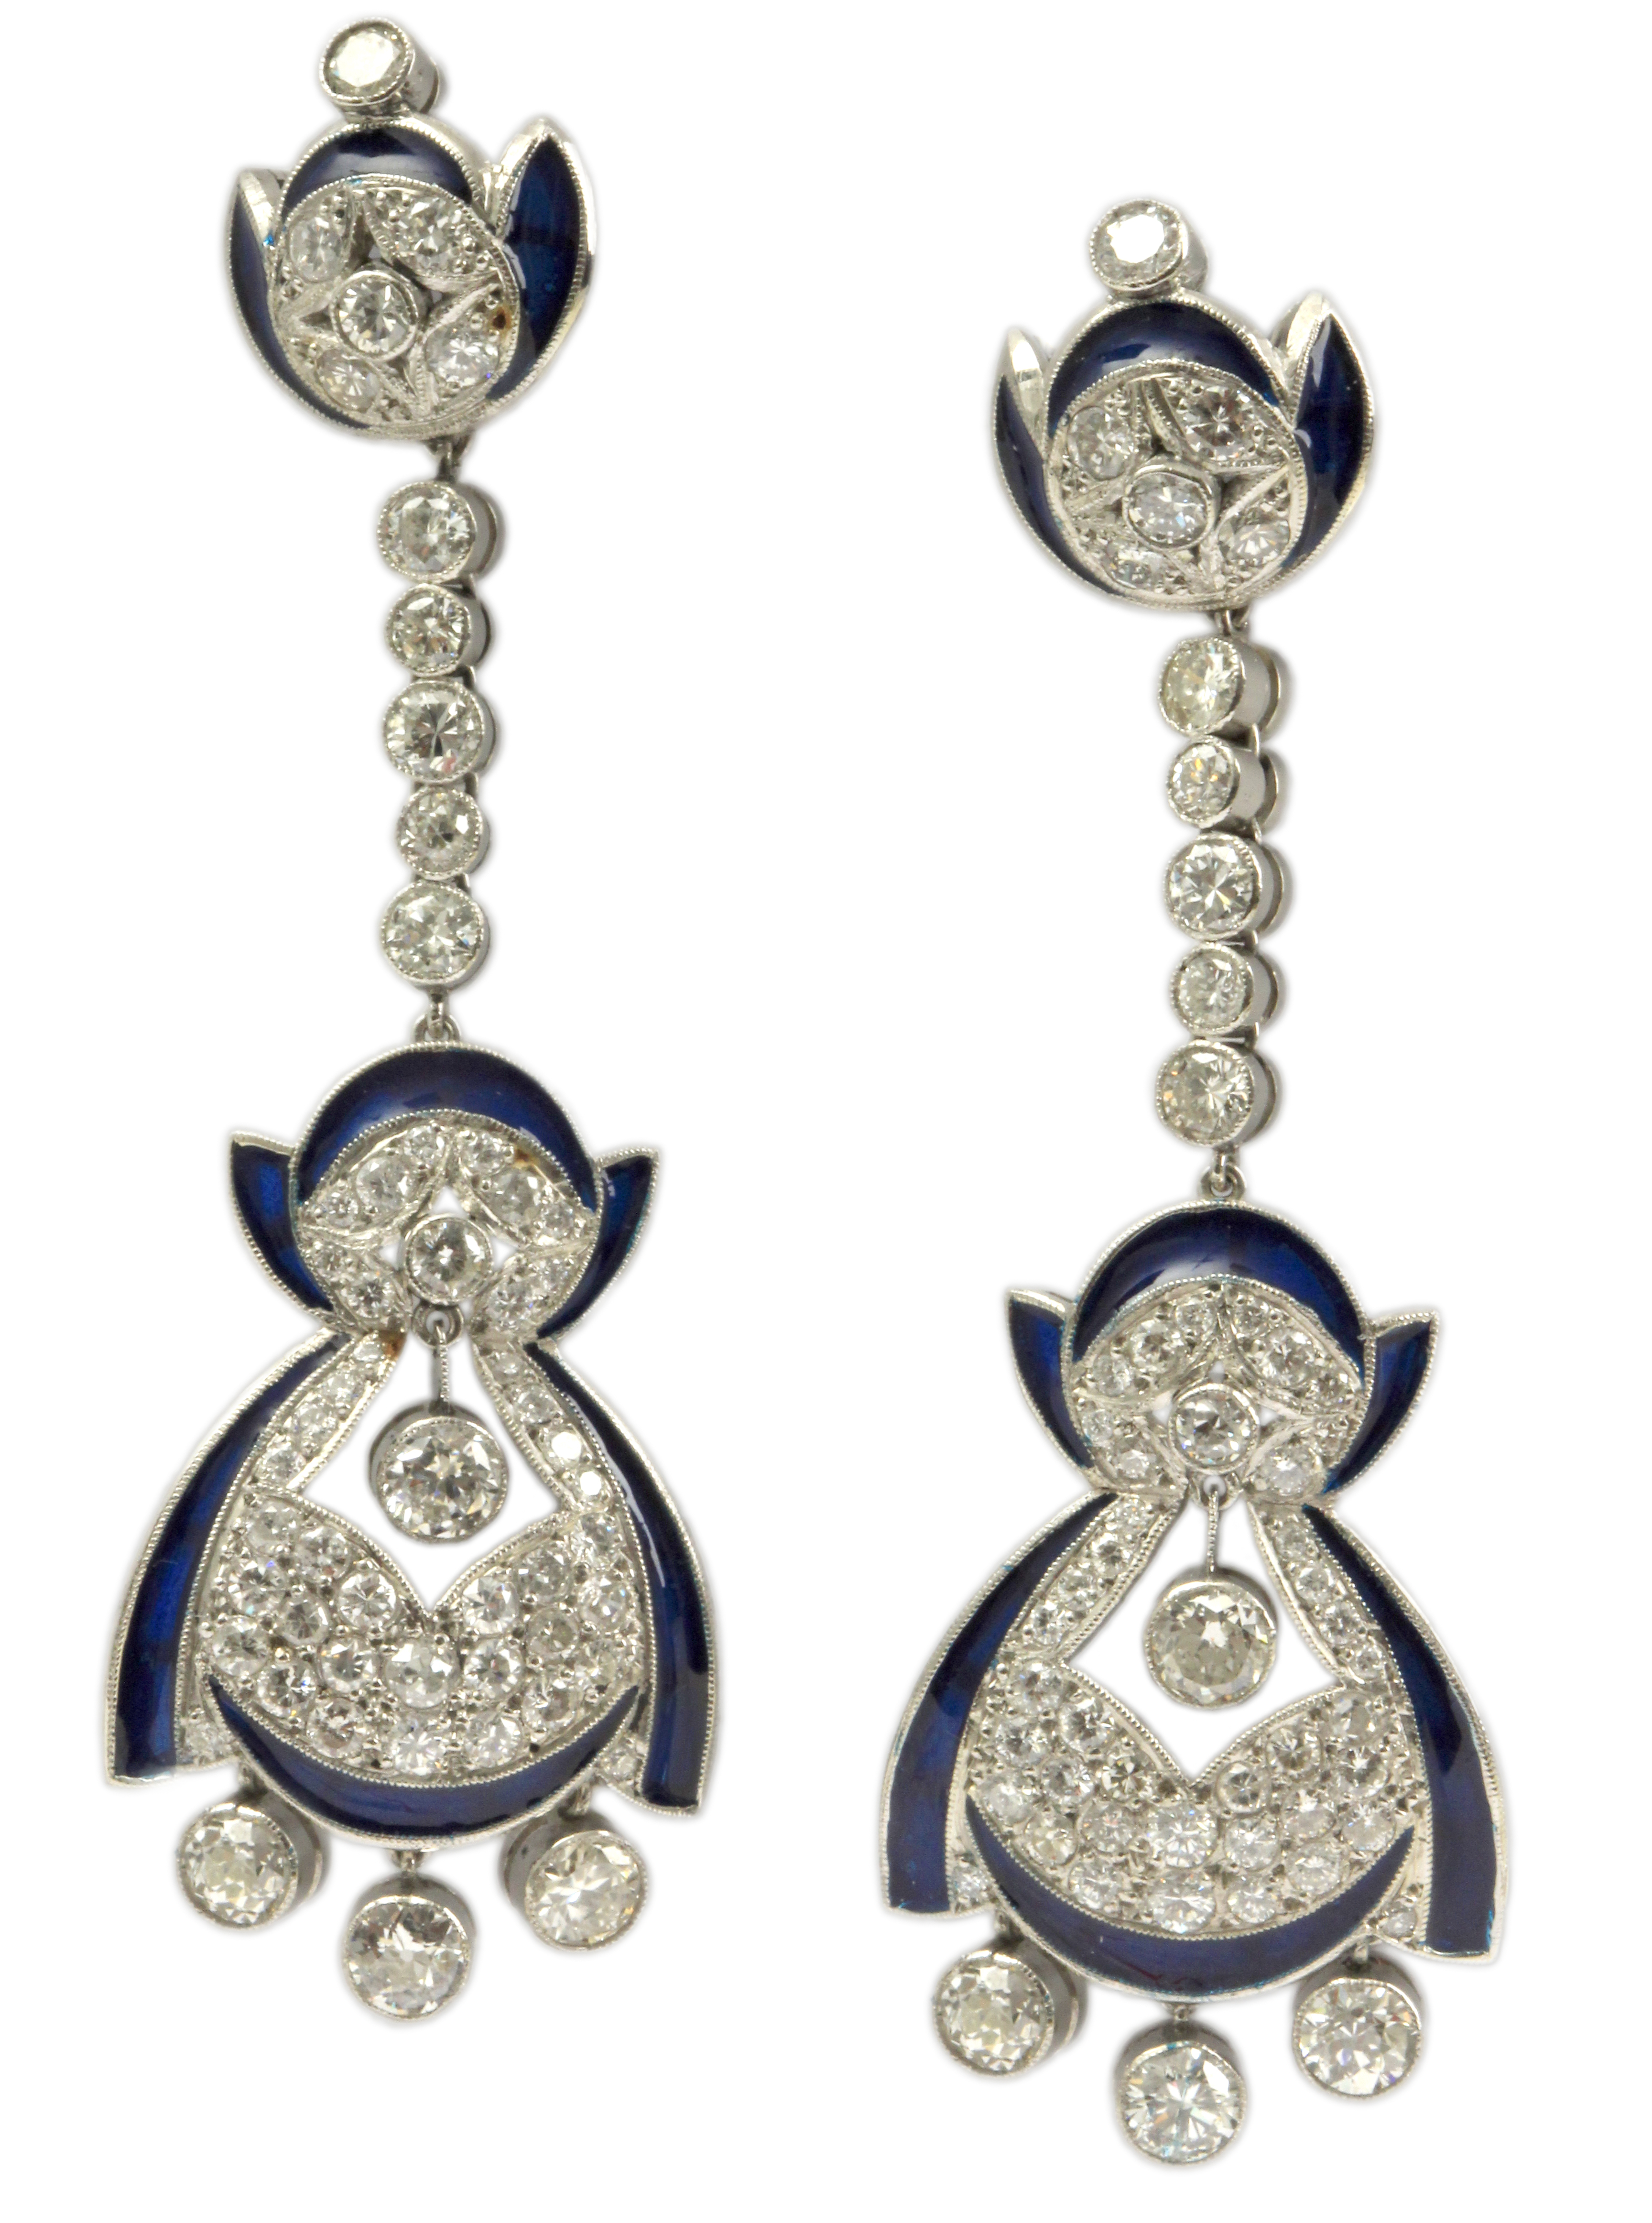 A pair of Art-Déco style diamond and enamel long earrings